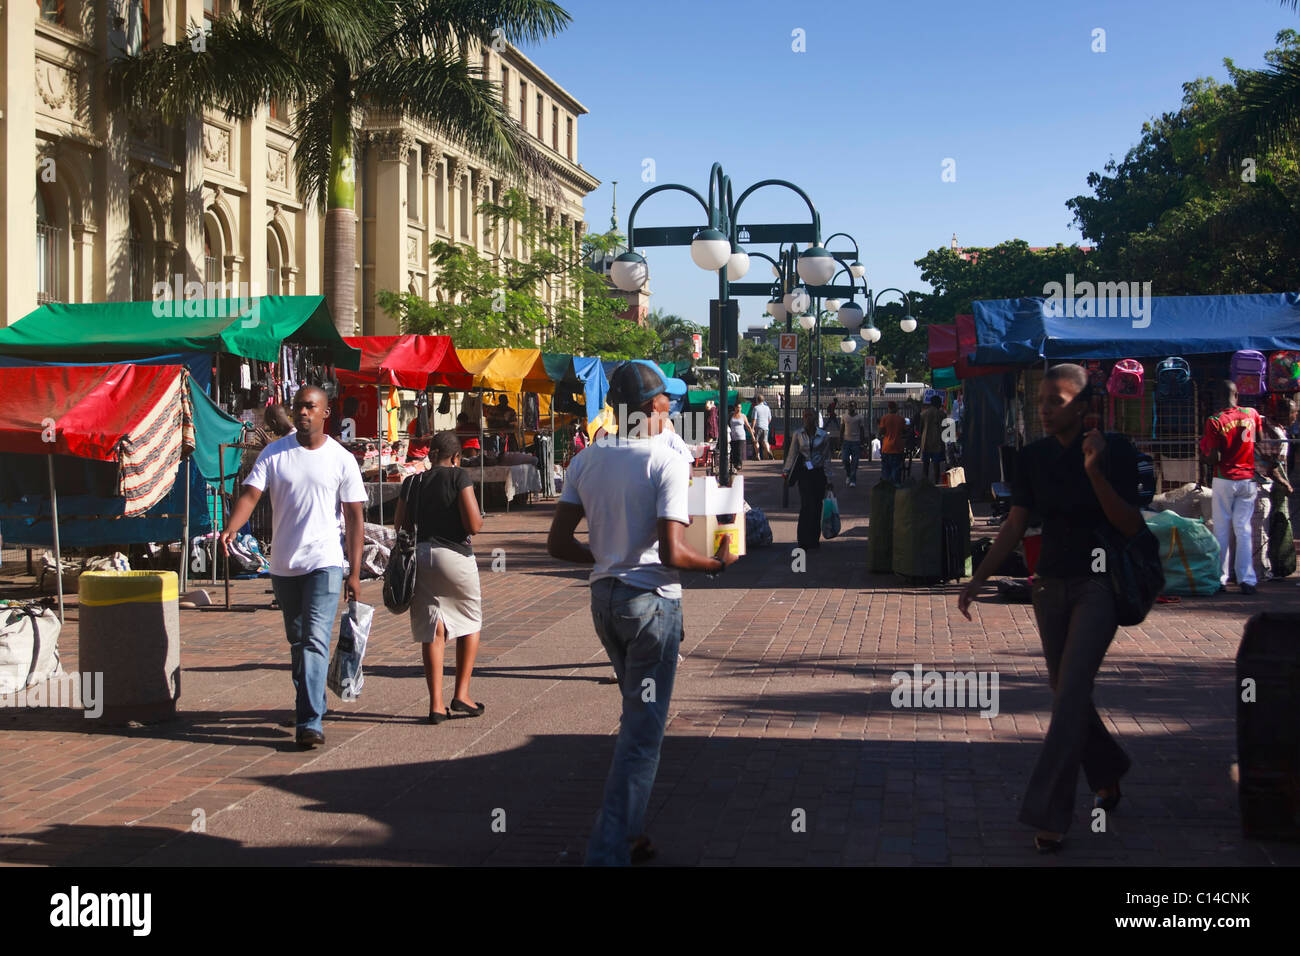 Hawkers setting up colourful street-side stalls along a busy city thoroughfare in central Durban, South Africa. Stock Photo